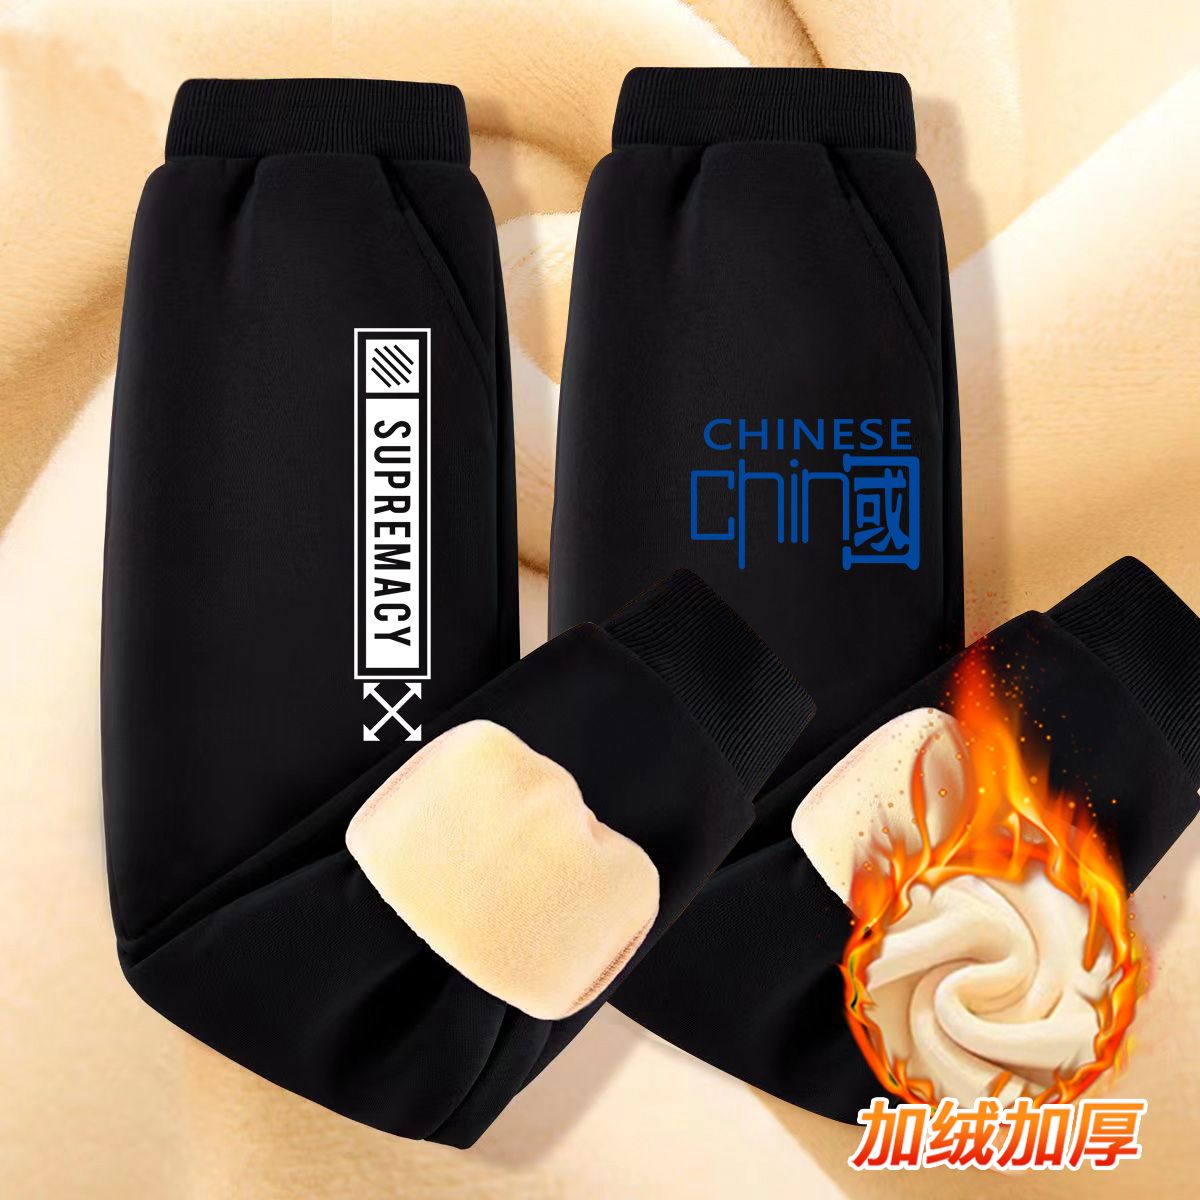 Boys' one-piece velvet plus fleece sweatpants  new winter boys' cool and handsome trousers, medium and large children's clothing warm sports pants